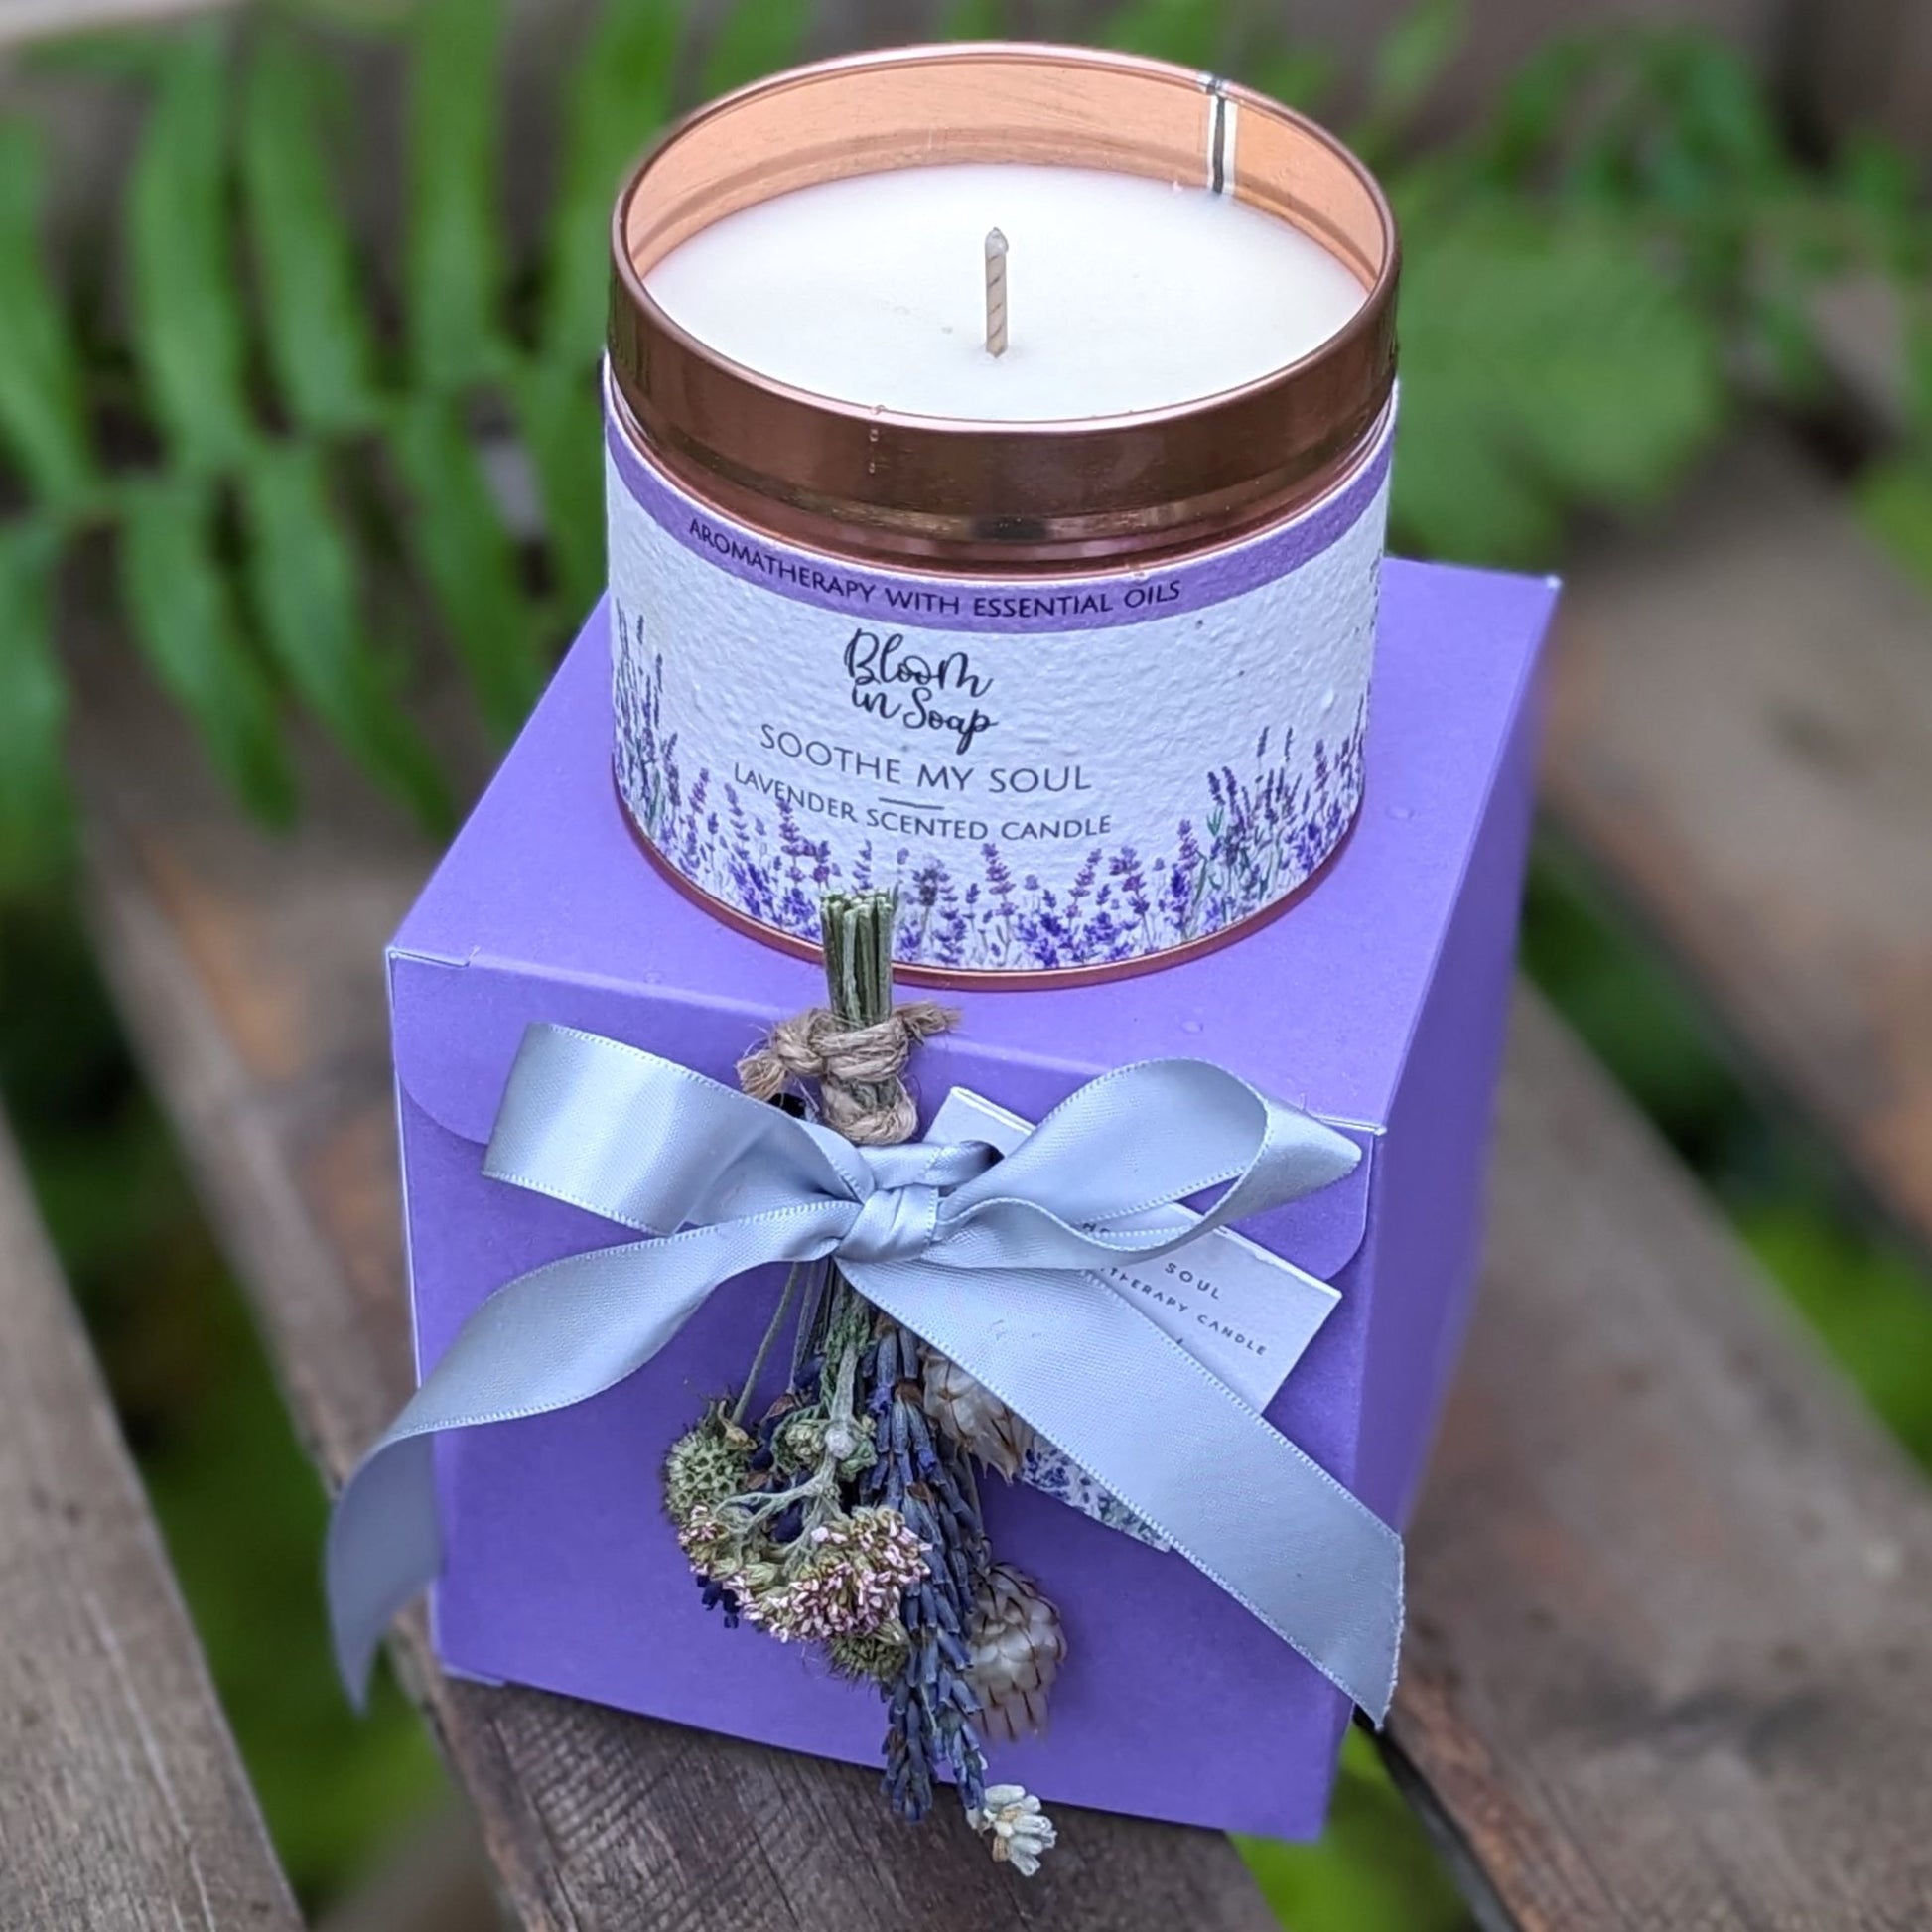 Soothe My Soul lavender candle in a gift box